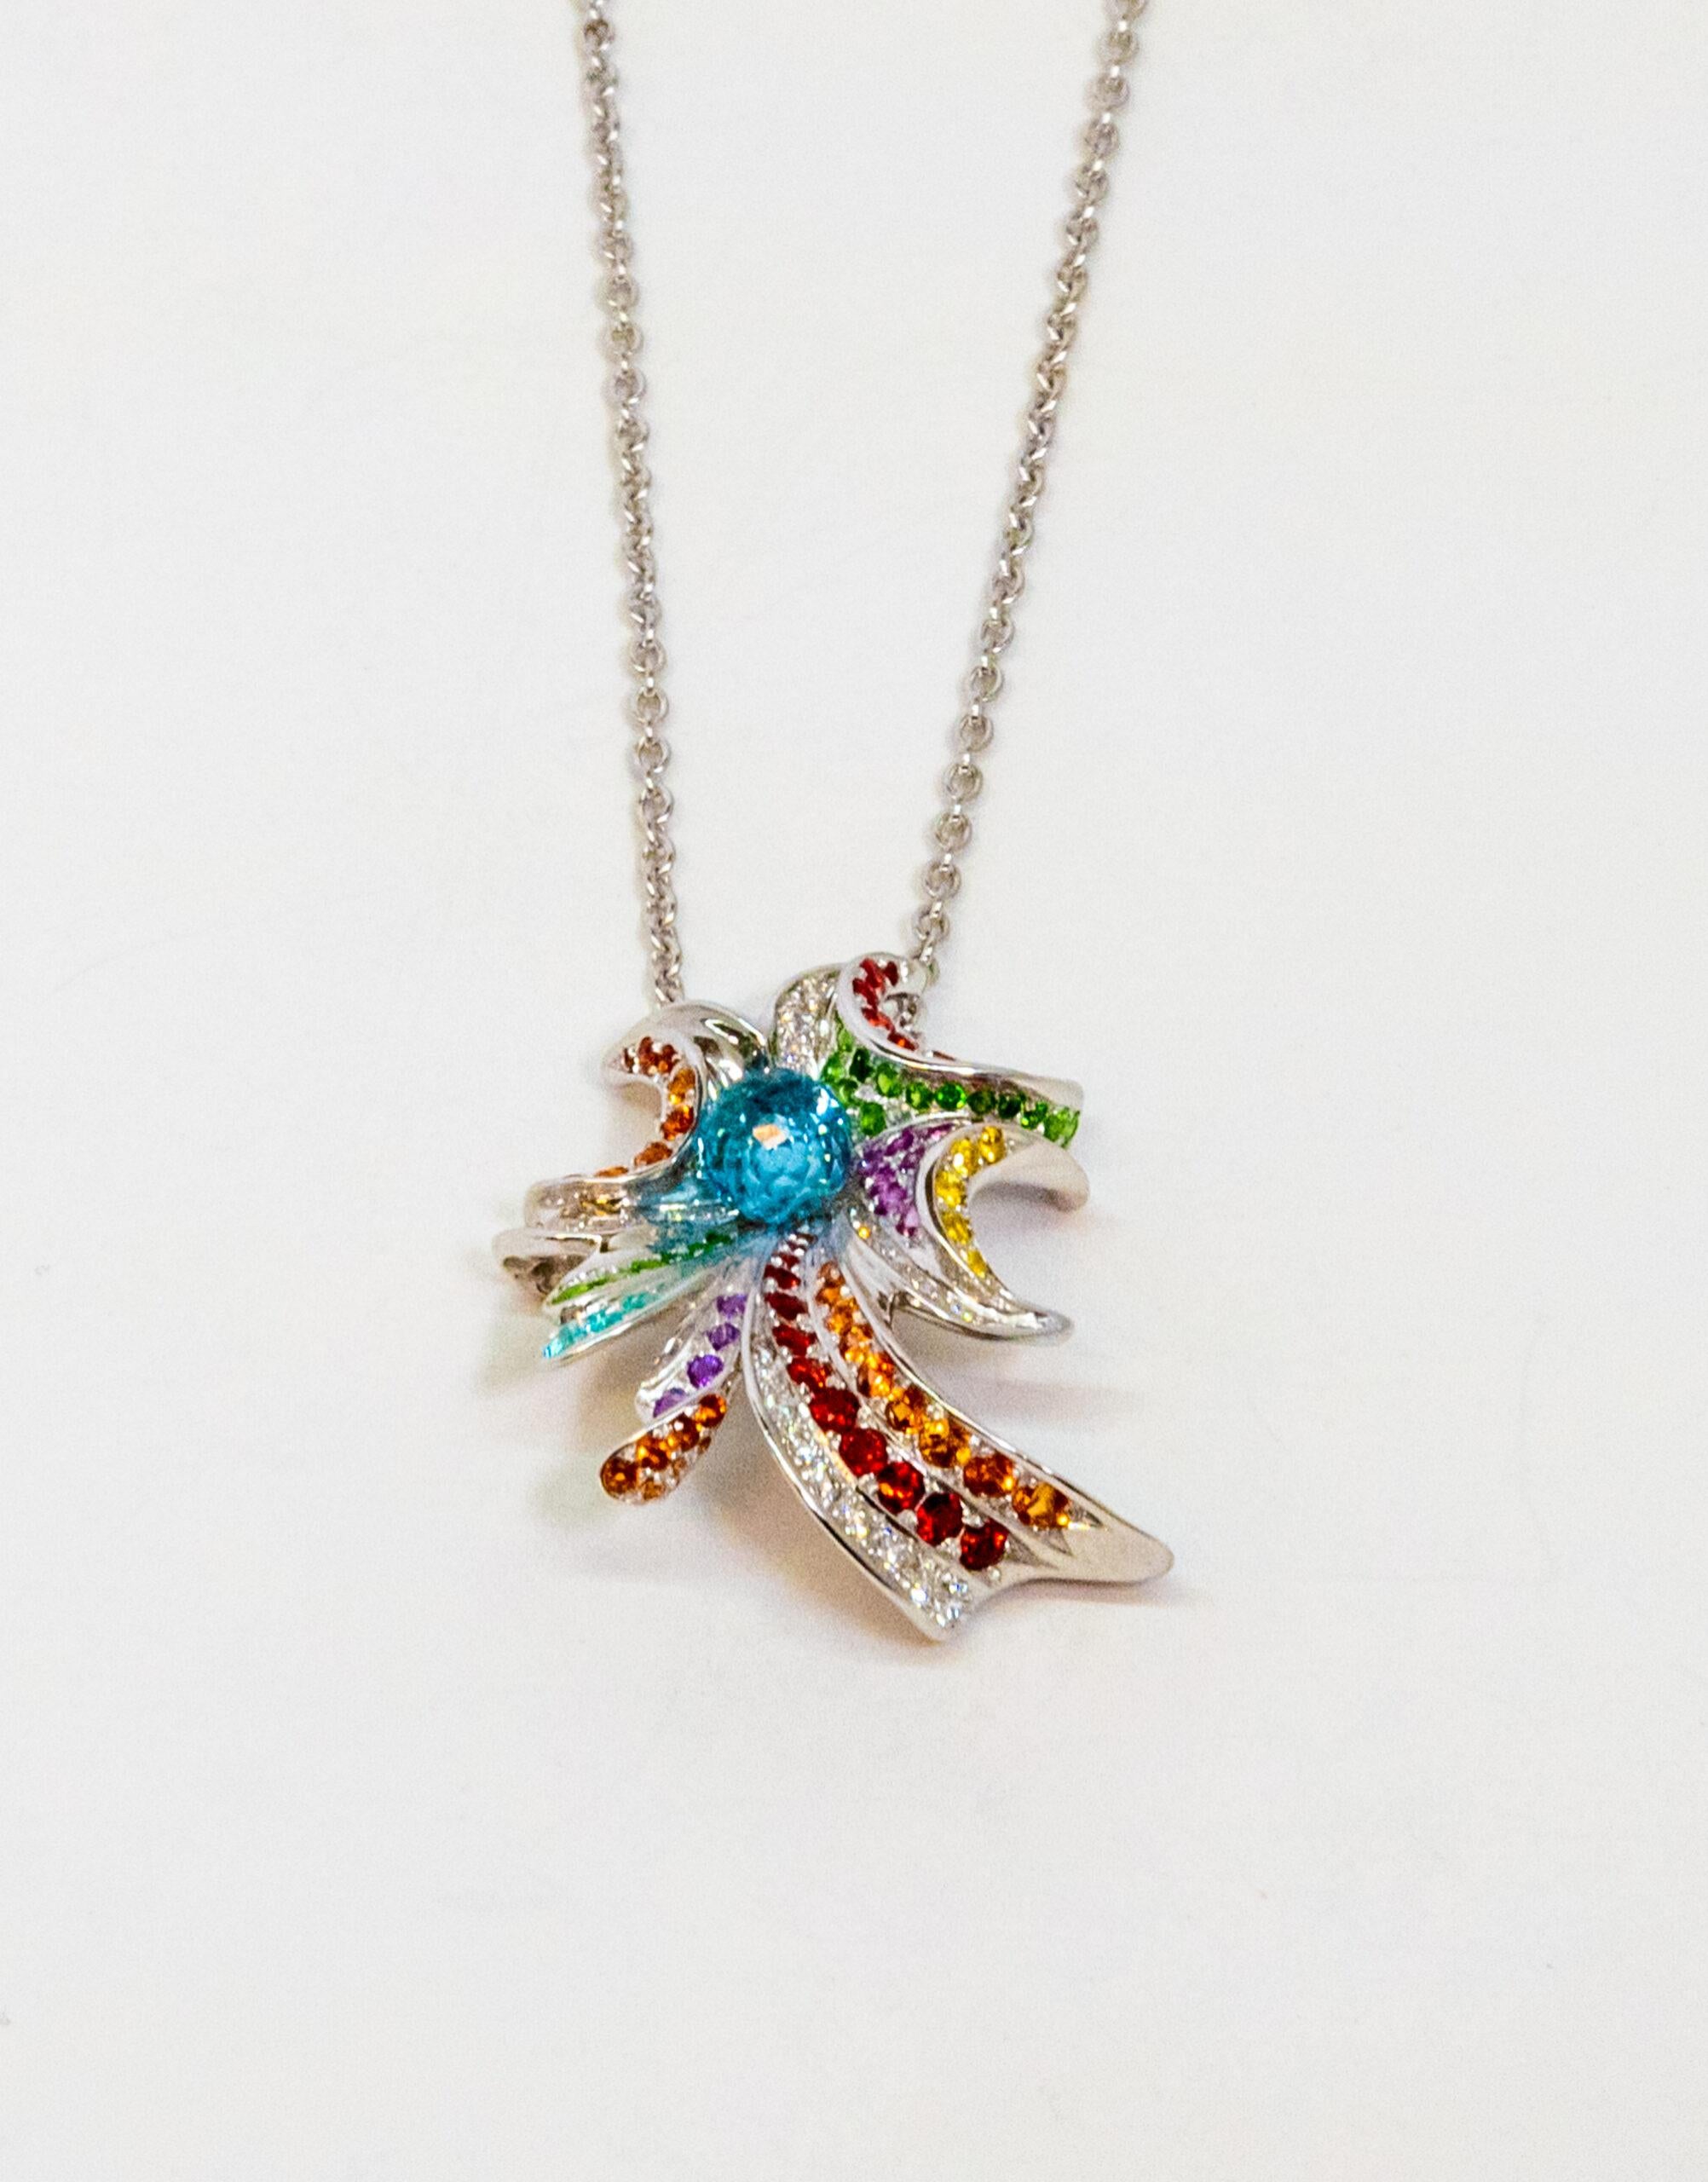 18K White Gold pendant. 18K White Gold cable chain with lobster claw lock. The pendant is set with light blue, purple, red, yellow, orange, pink, green sapphires and diamonds (~0.34ct). Dancing blue Tourmaline in the middle (8.00 un)

Chain Length: